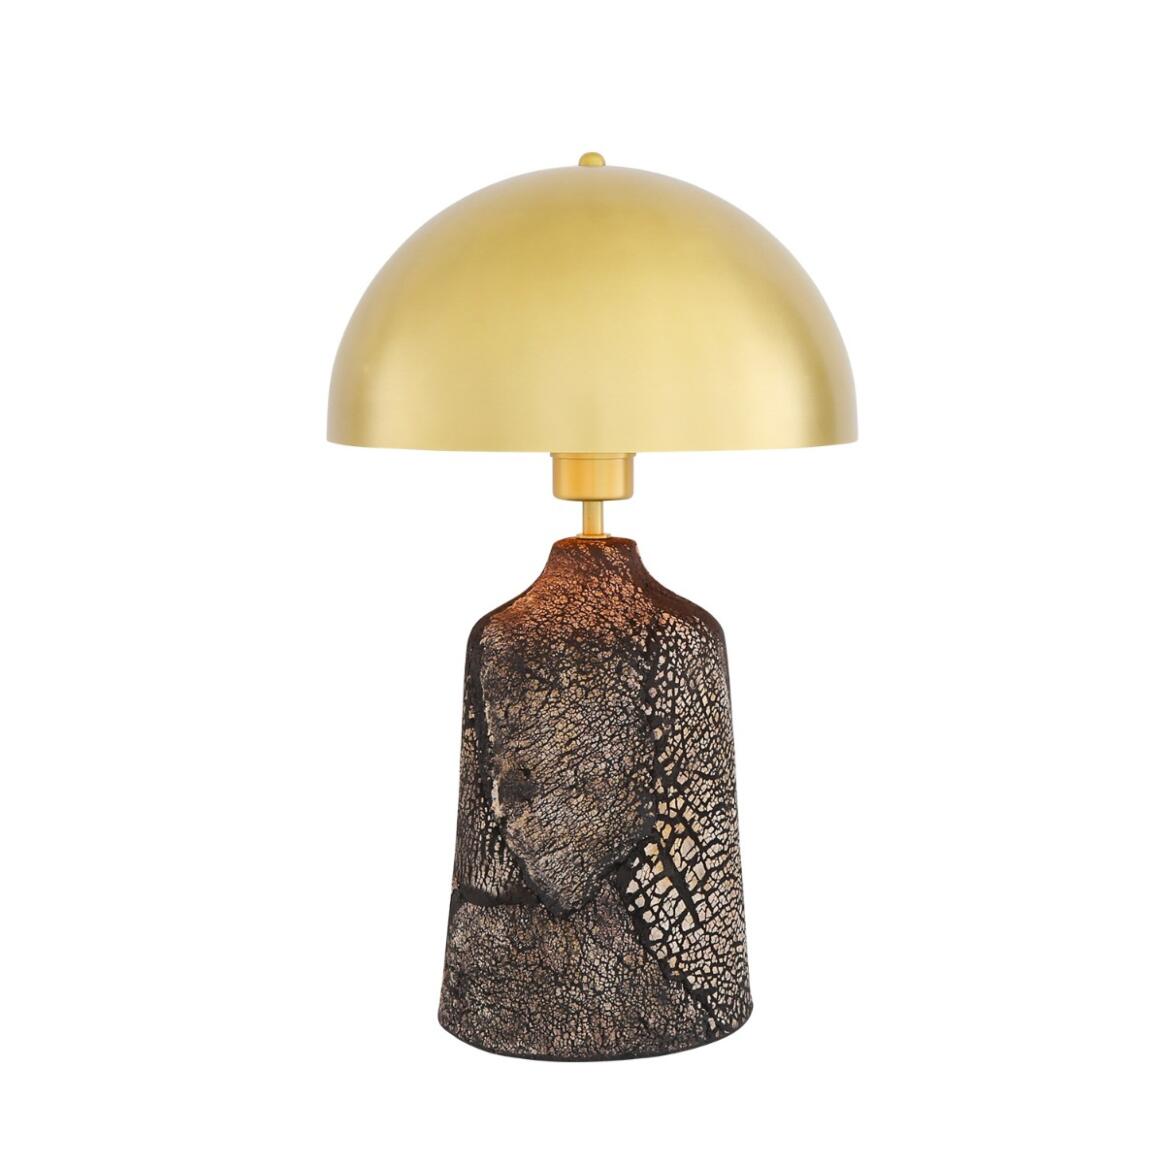 Cassia Tall Ceramic Table Lamp with Brass Dome Shade, Black Clay main product image